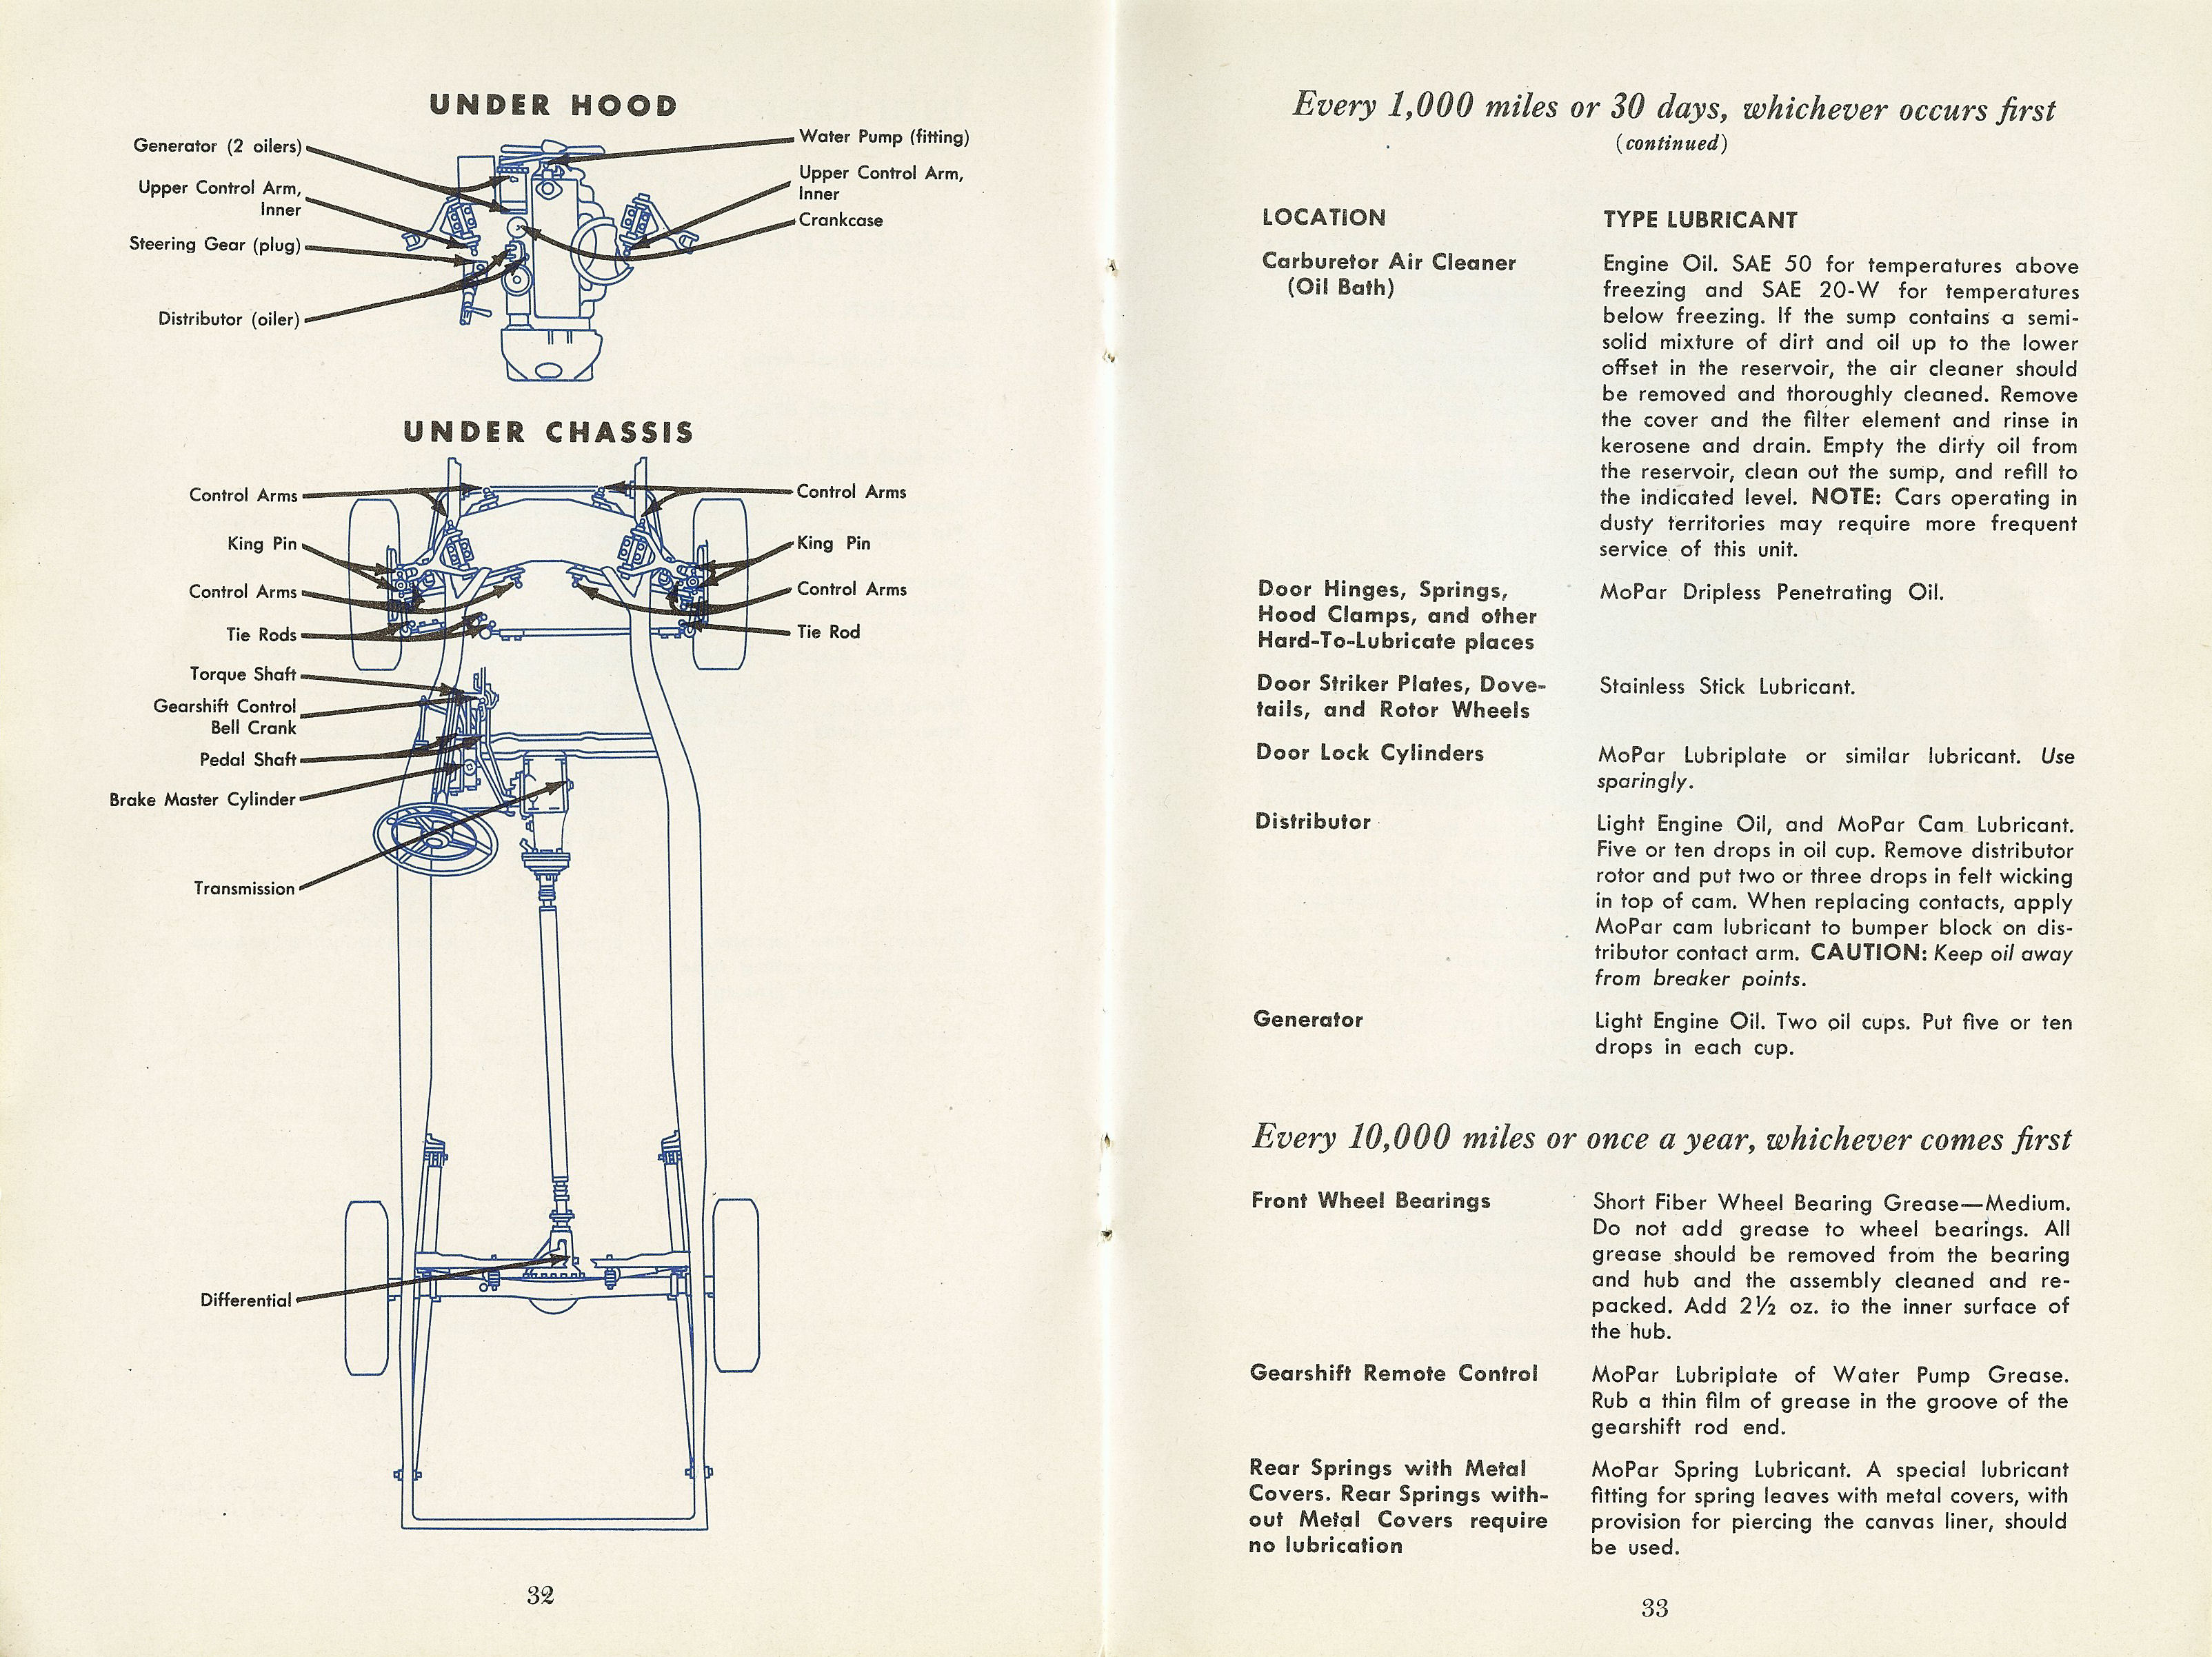 1954 Dodge Car Owners Manual Page 4